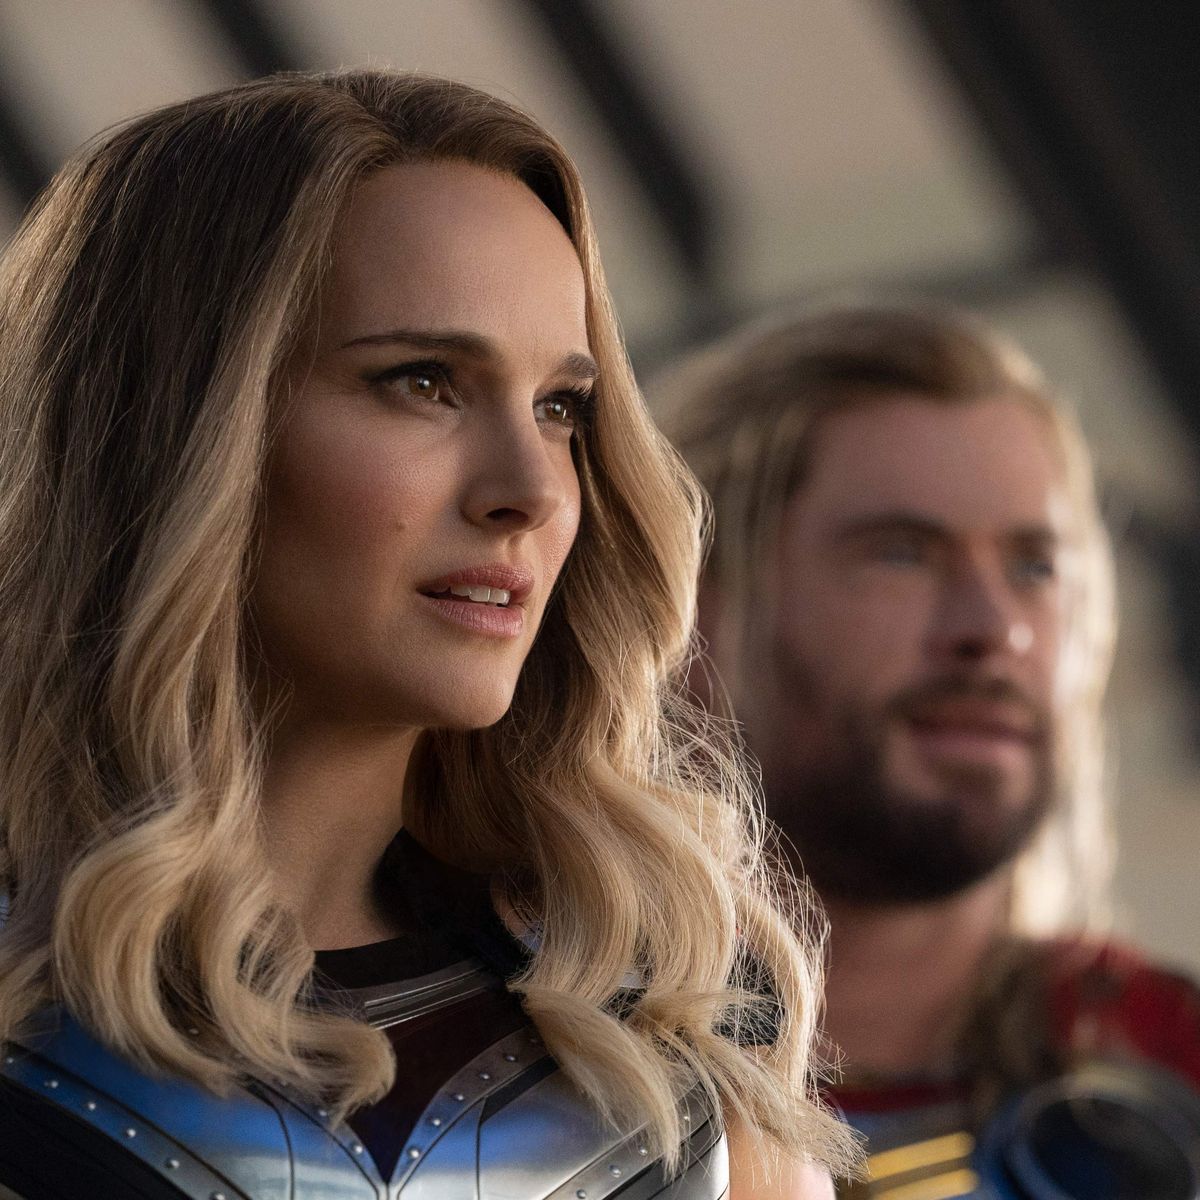 Thor: Love and Thunder' Box Office Crumbles